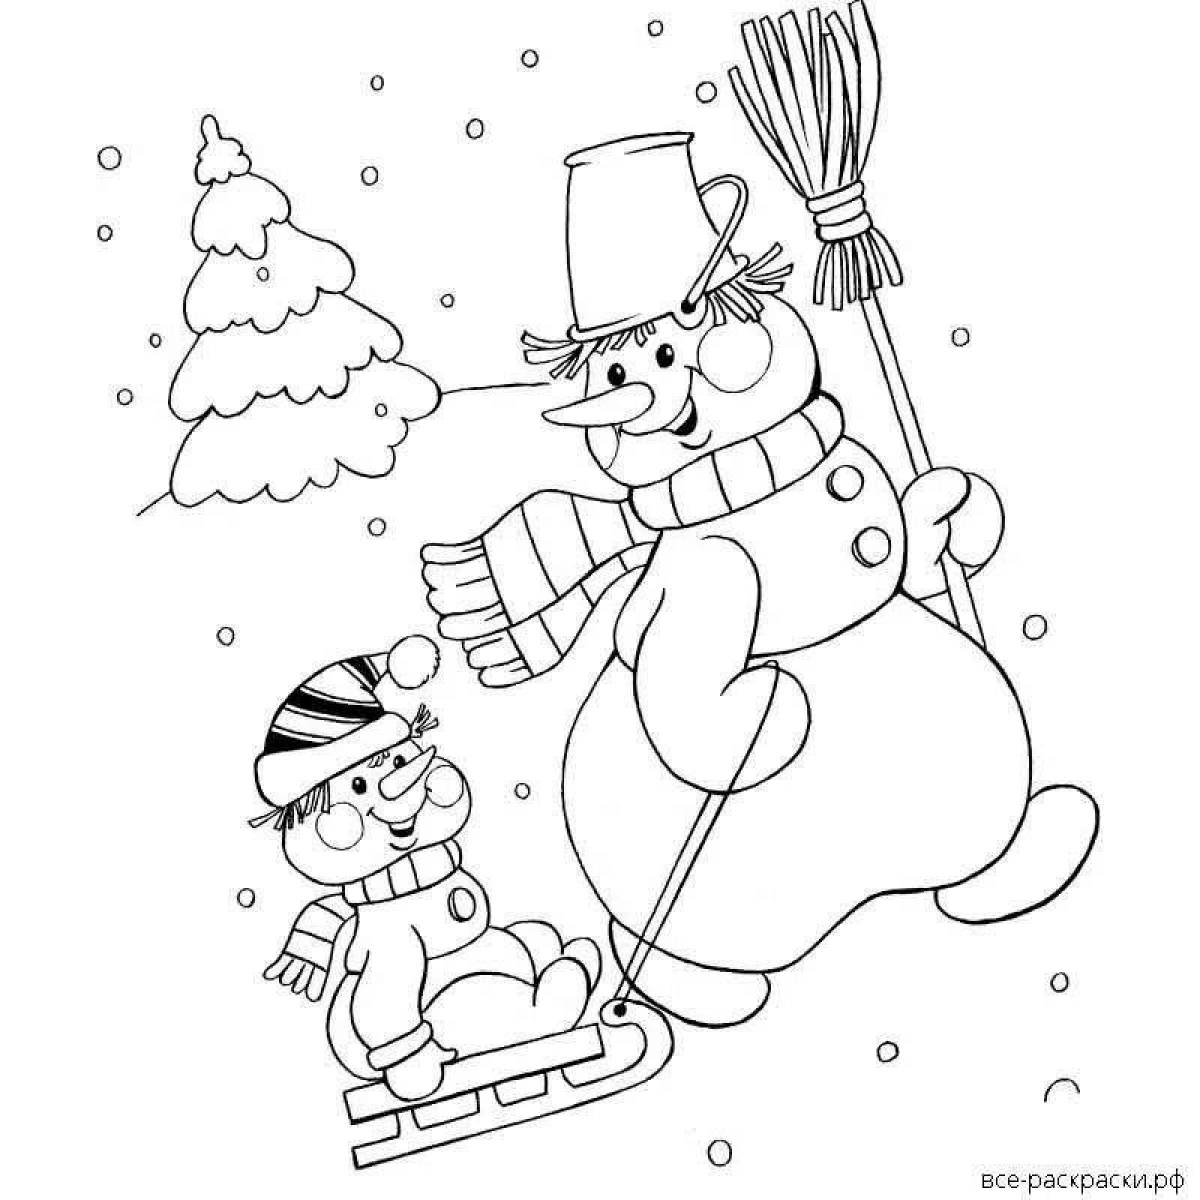 Snowman skiing coloring page